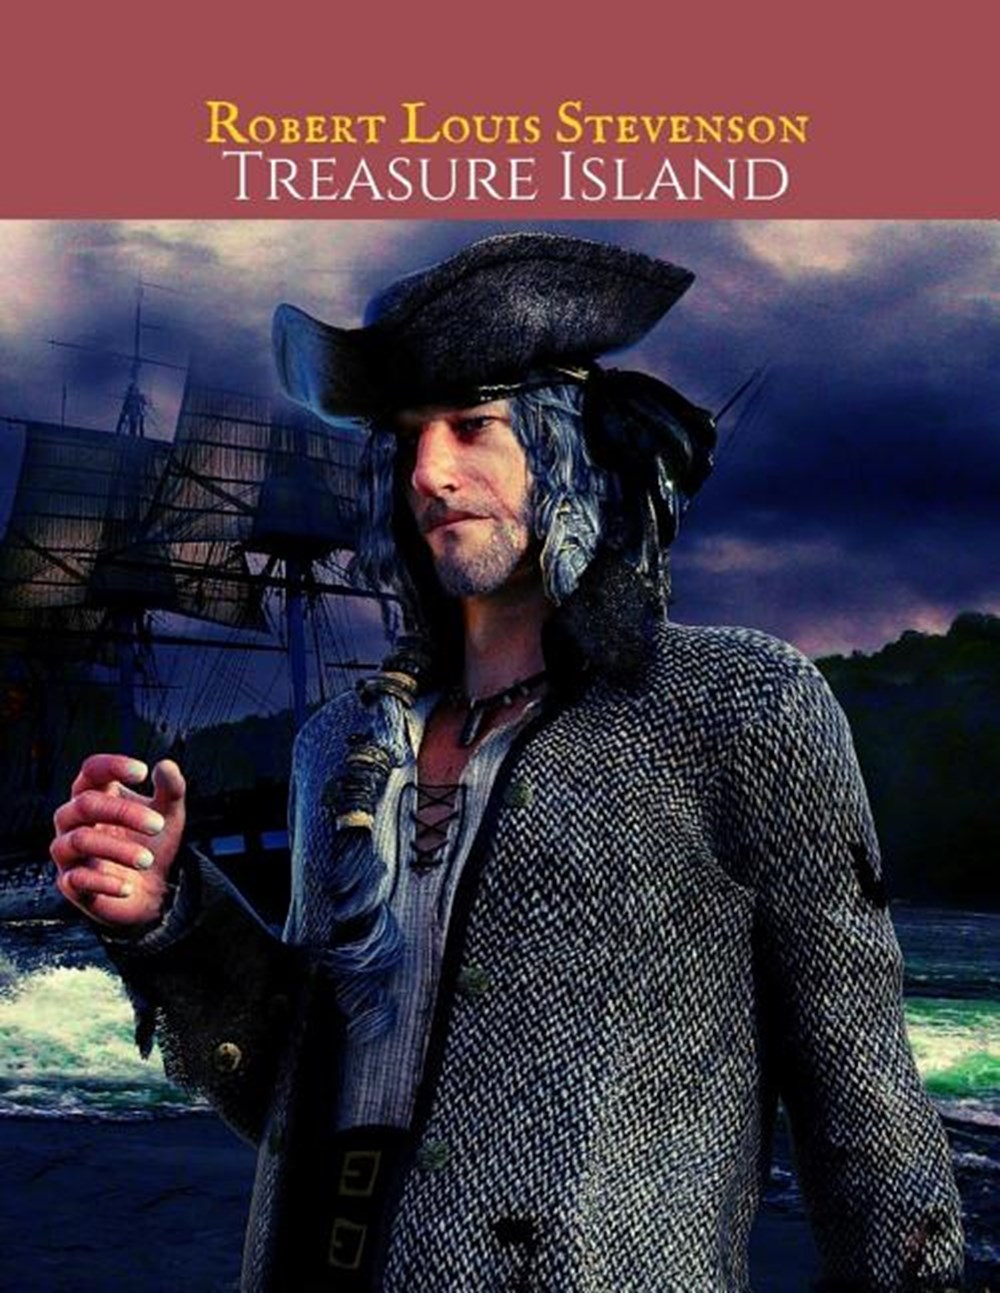 Treasure Island The Evergreen Vintage Story (Annotated) By Robert Louis Stevenson.